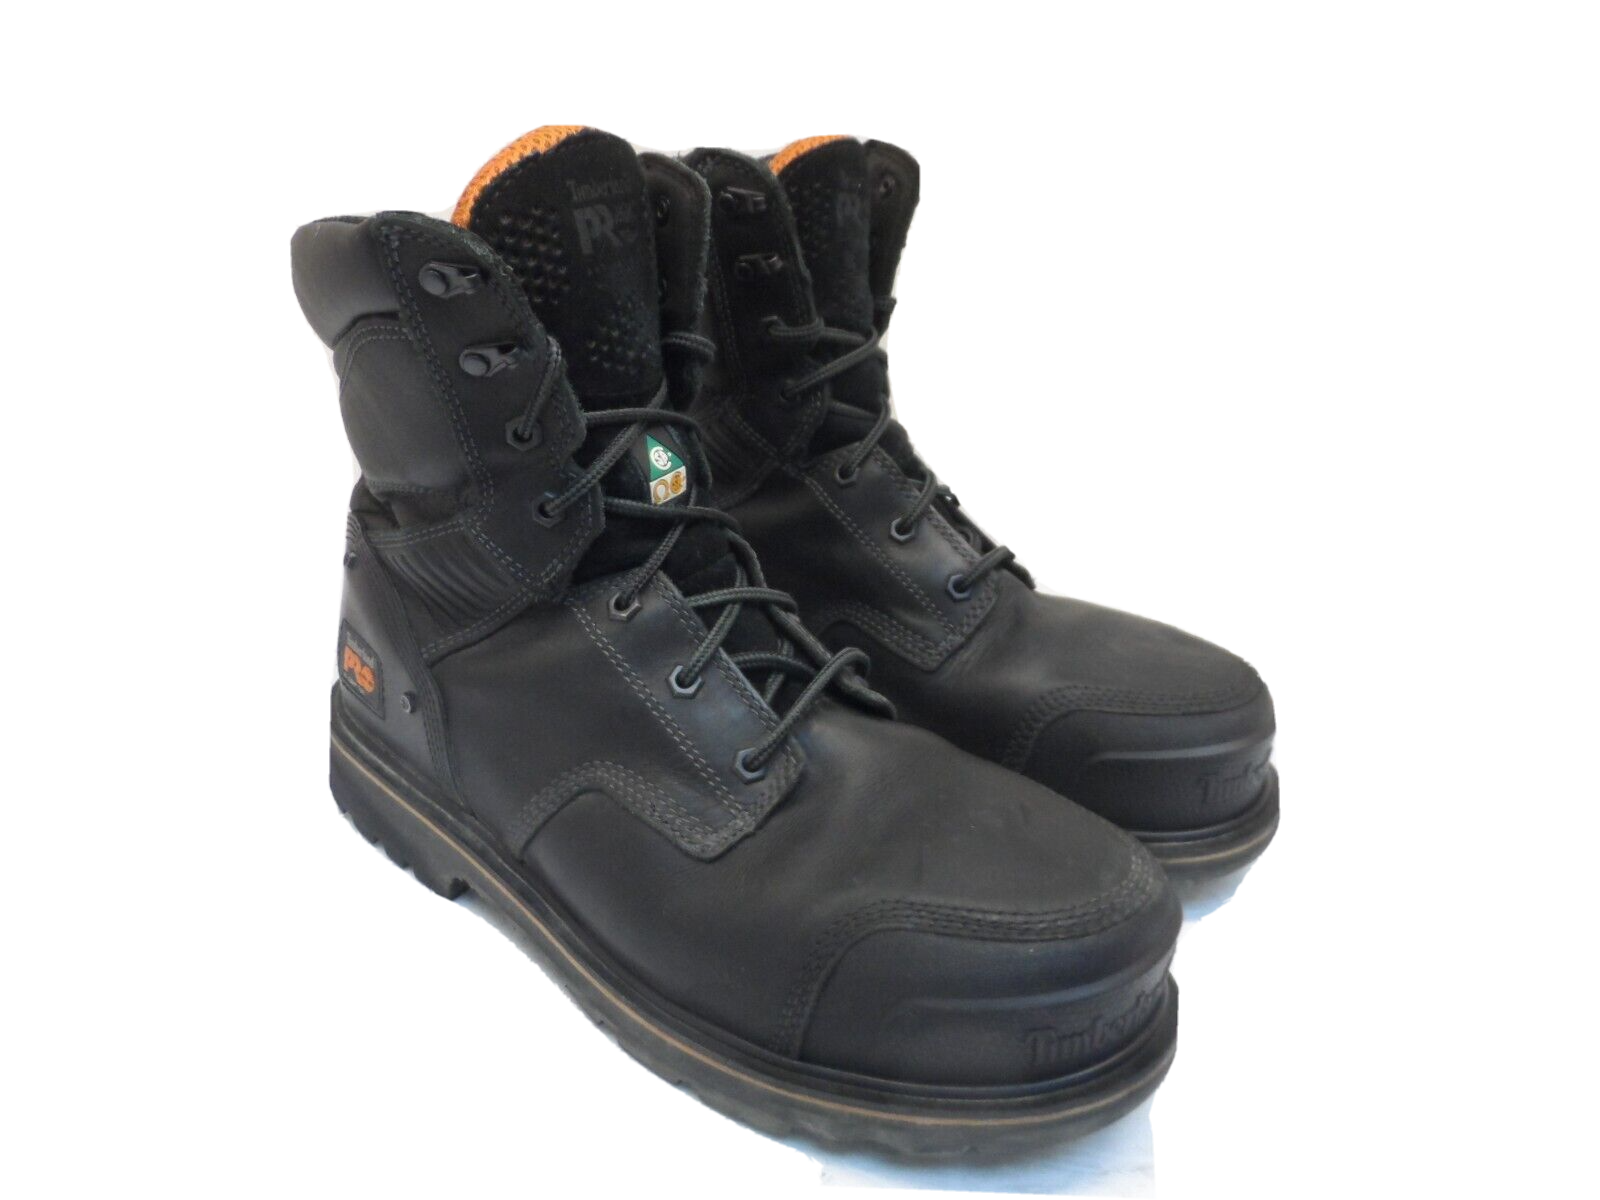 Primary image for Timberland PRO Men's 8" Ballast Composite Toe Work Boot Black Size 10.5W